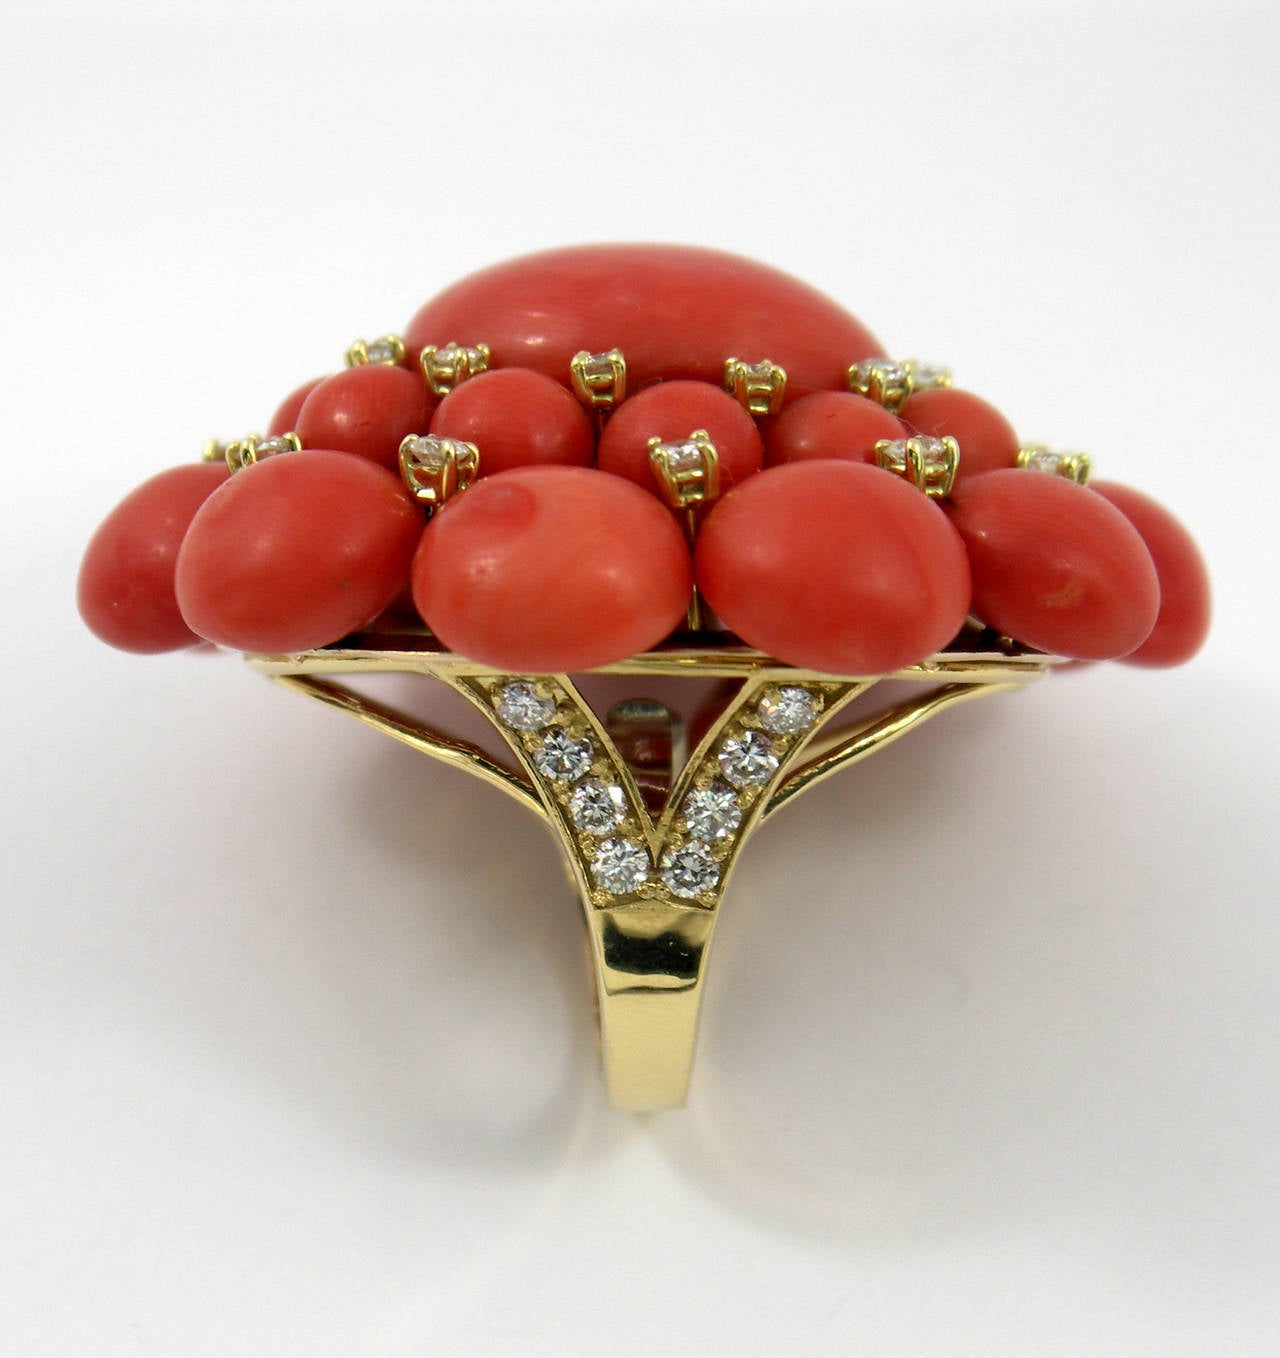 A ladies ring comprised of a 14K yellow gold upper portion, with 18K yellow gold shoulders and shank. The design area measures 2 1/4 inches long and 2 inches wide, and is embellished with 22 round cabochon corals, and one oval cabochon coral